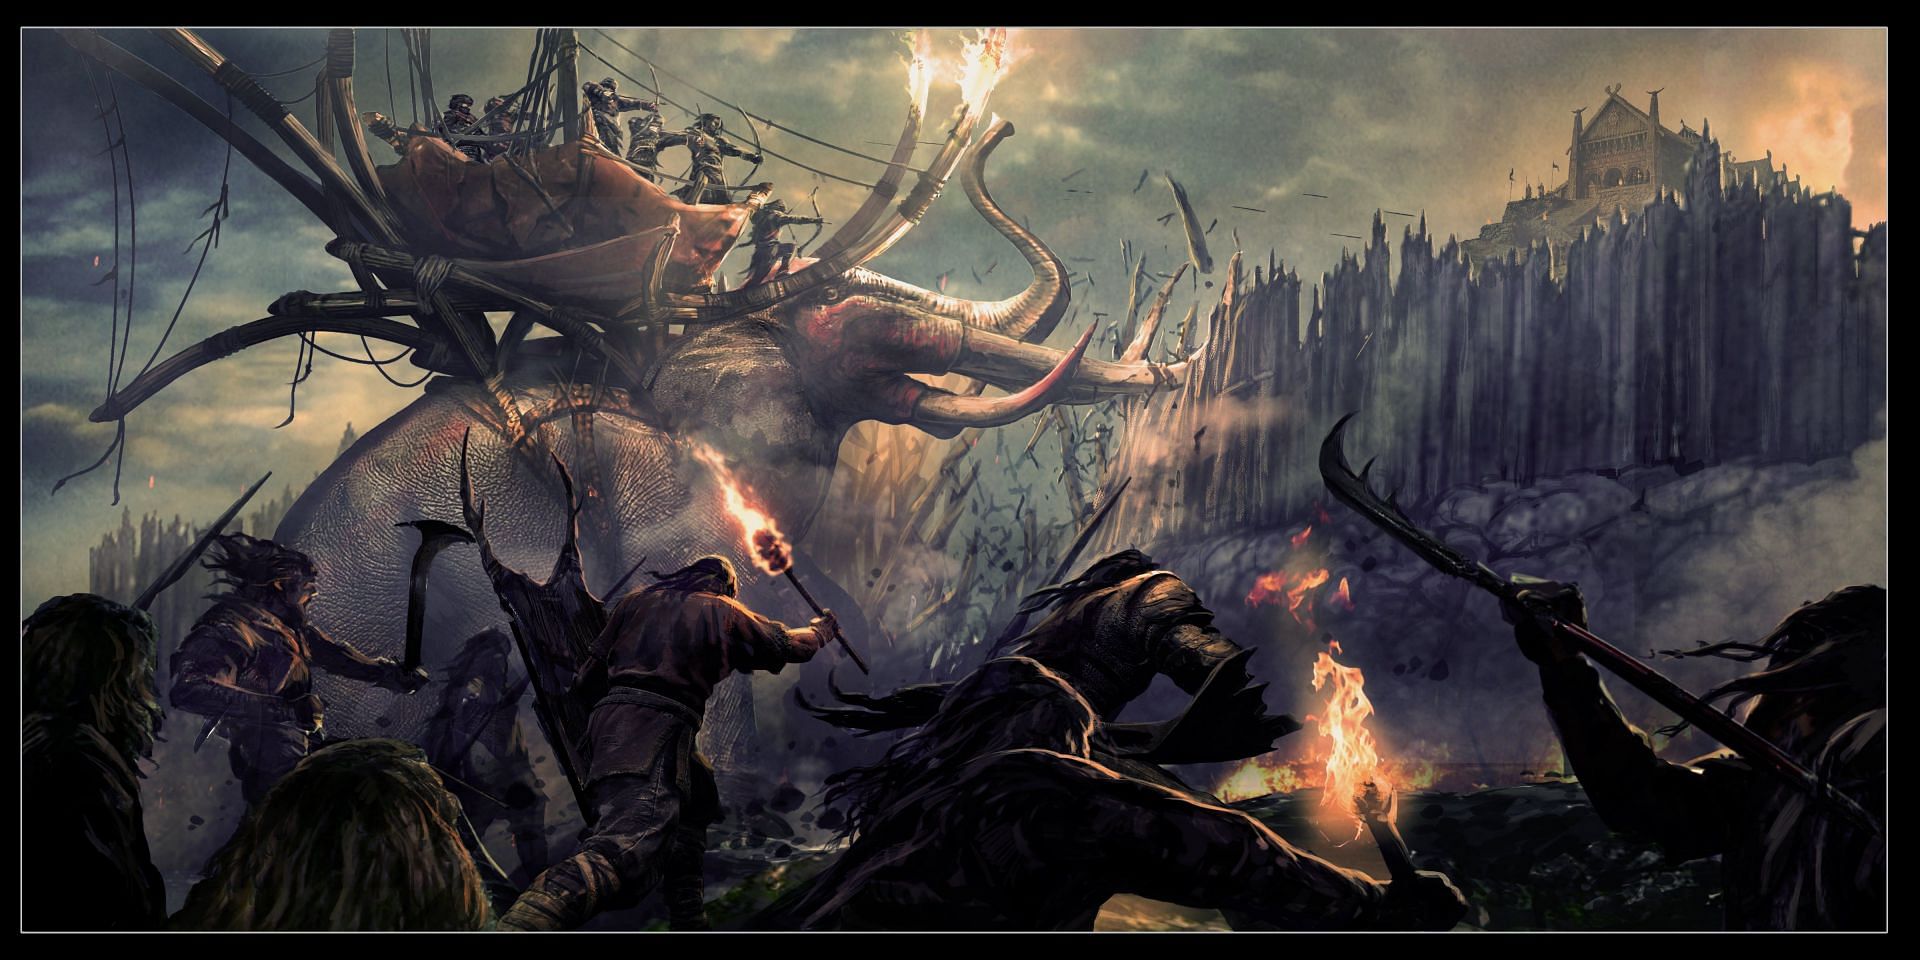 Concept art of the upcoming LOTR movie (Image via IGN)